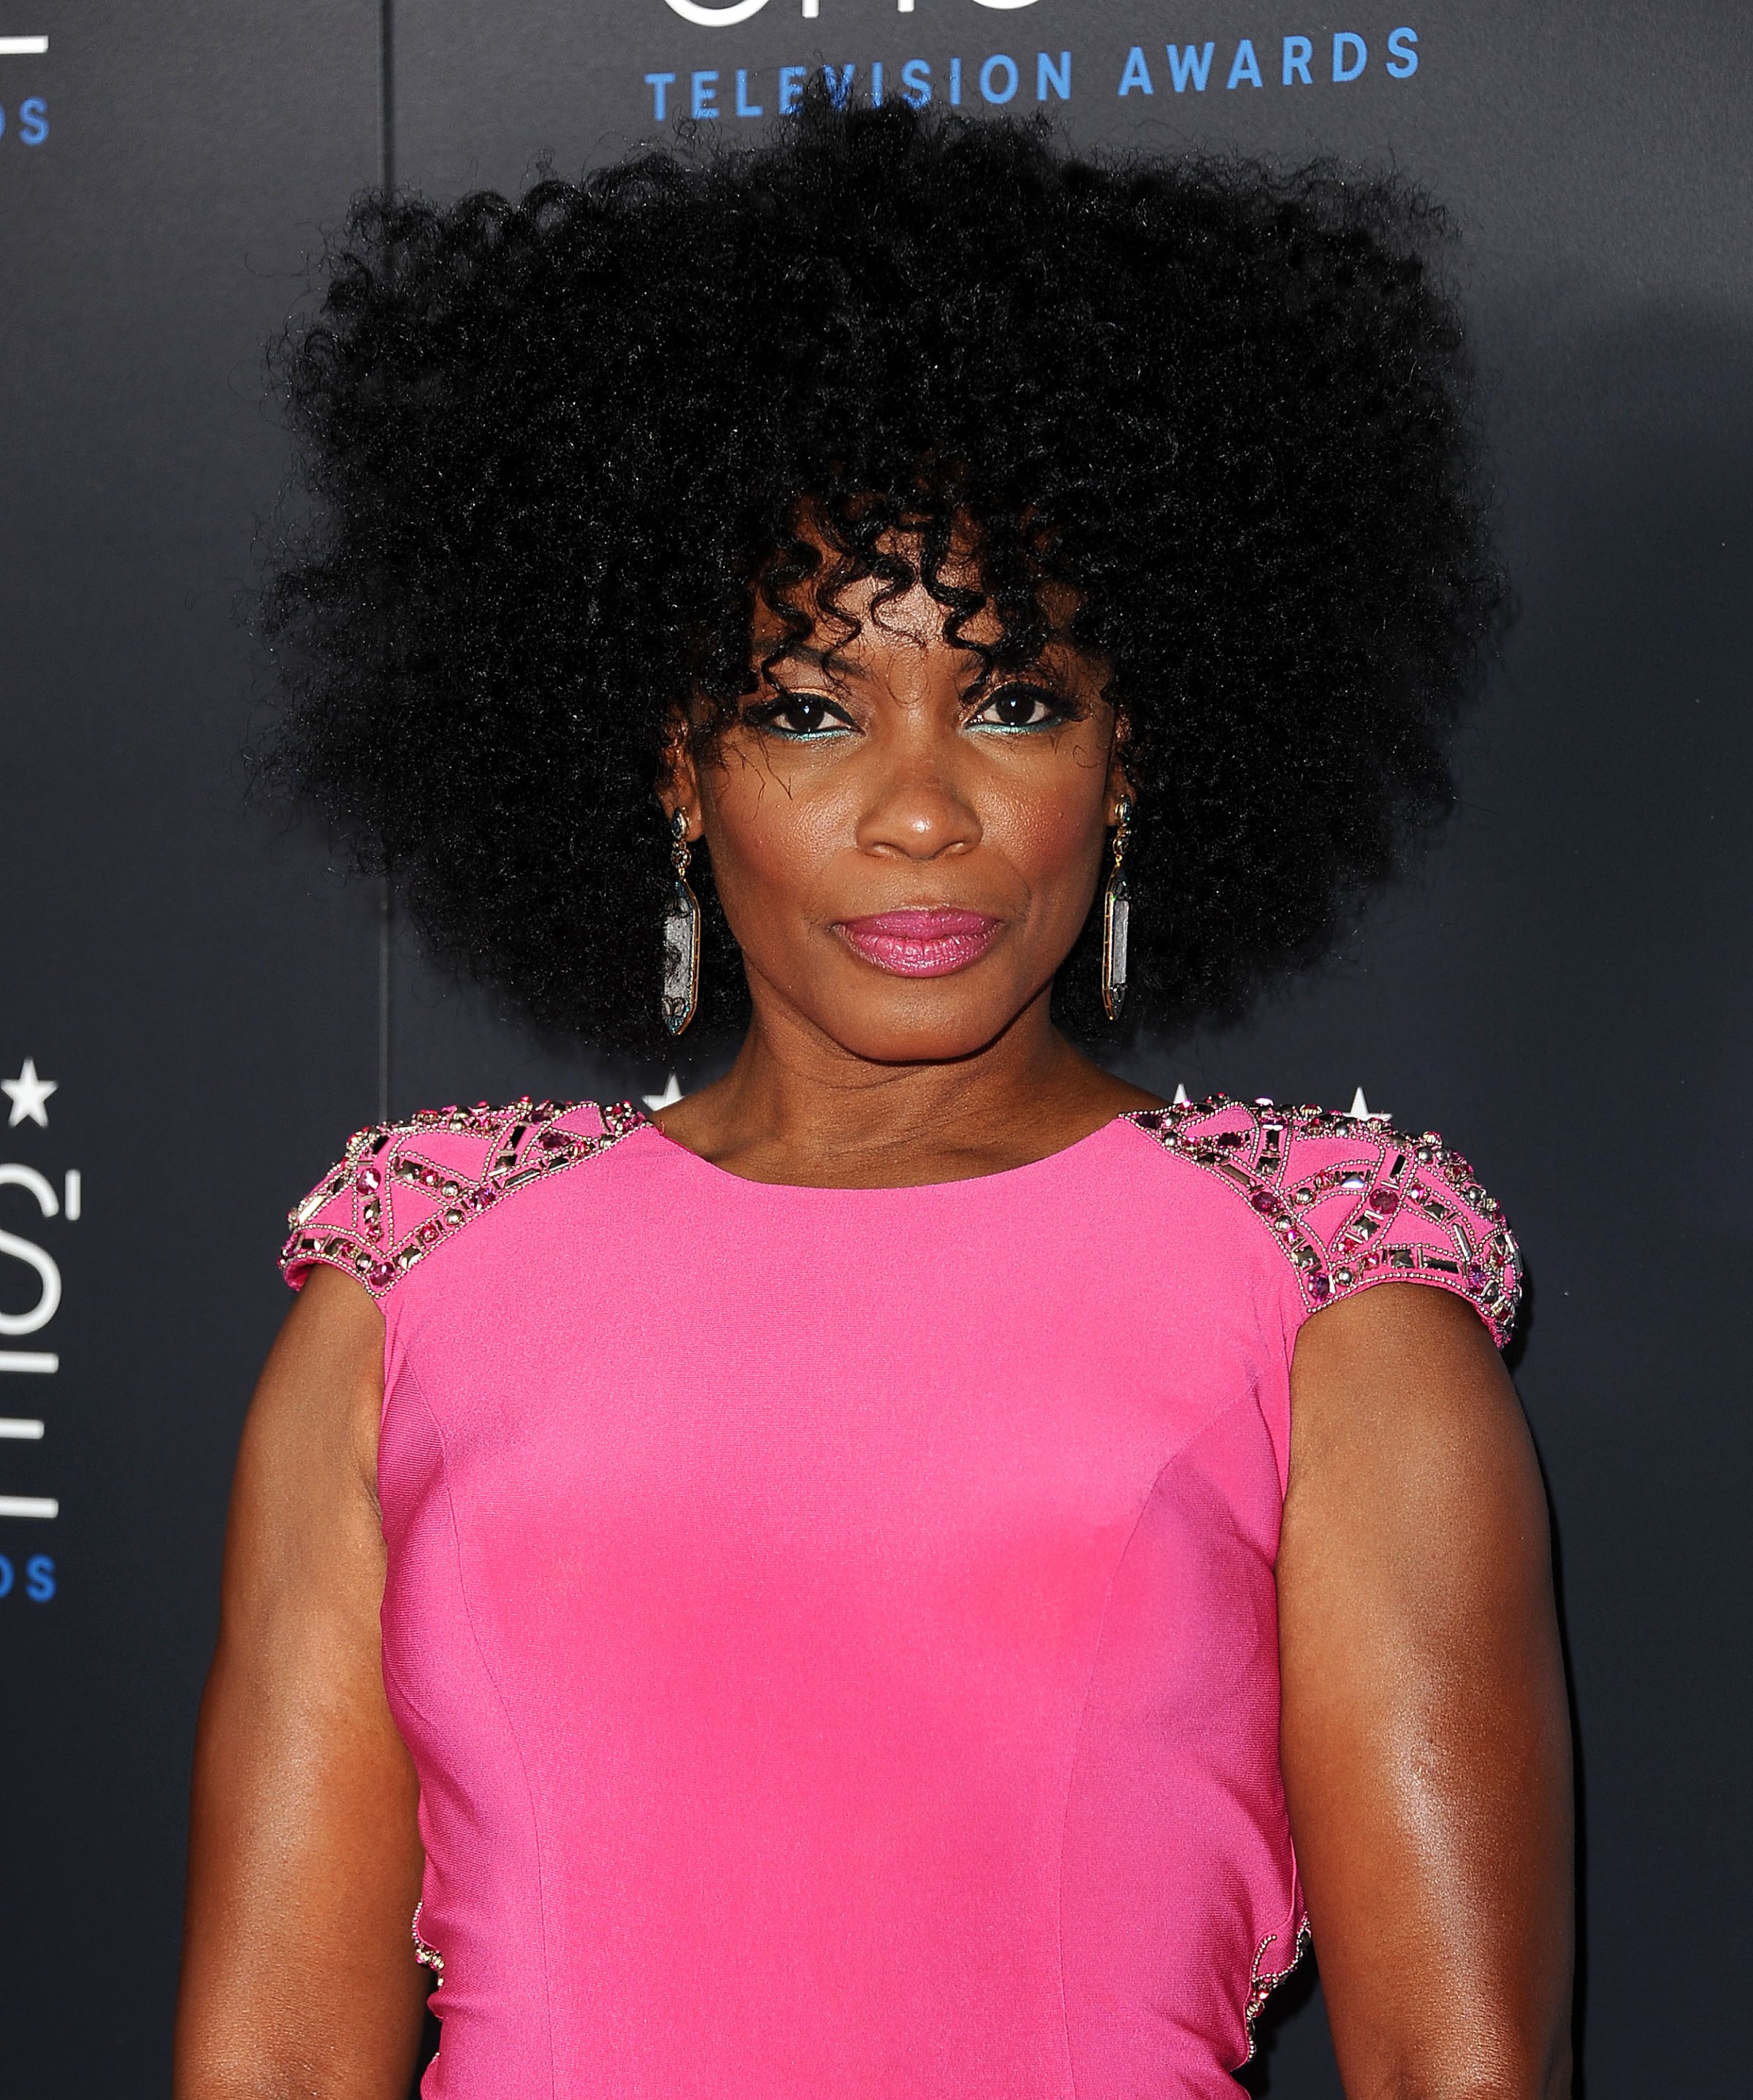 Actress Aunjanue Ellis attends the 5th annual Critics' Choice Television Awards in Beverly Hills, Calif., on May 31, 2015.